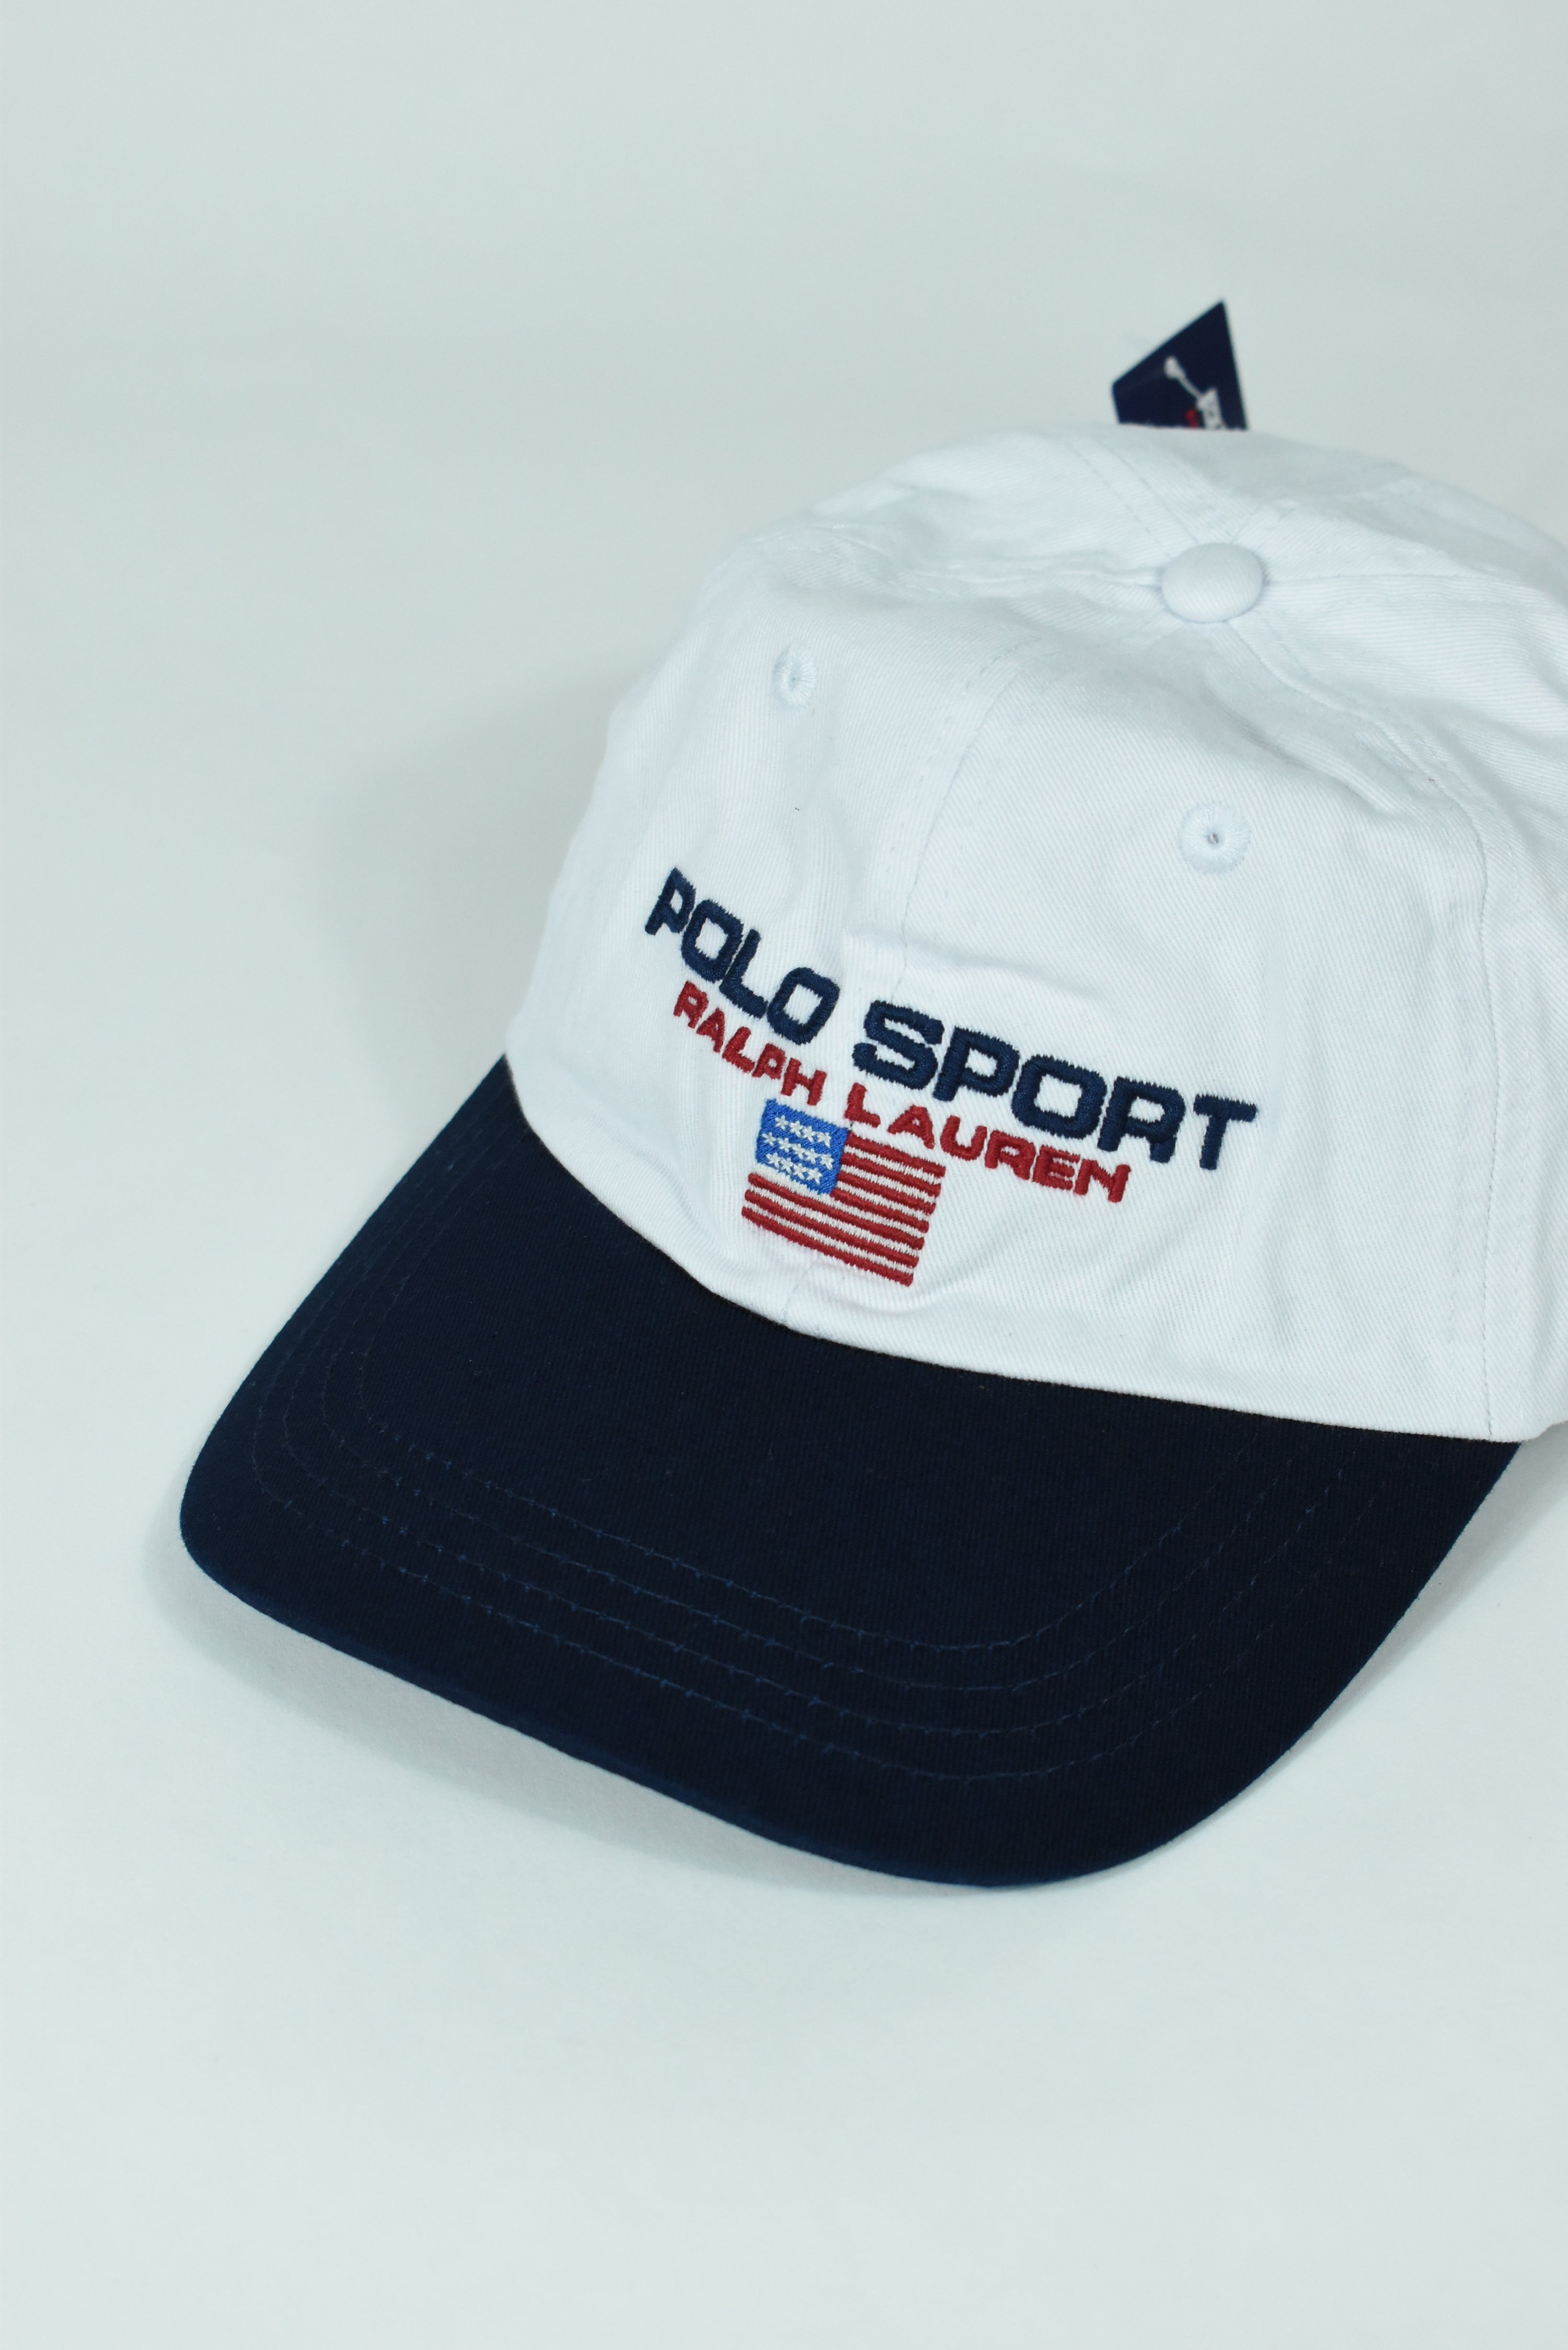 New White/Navy RL Polo Sport Embroidery Cap